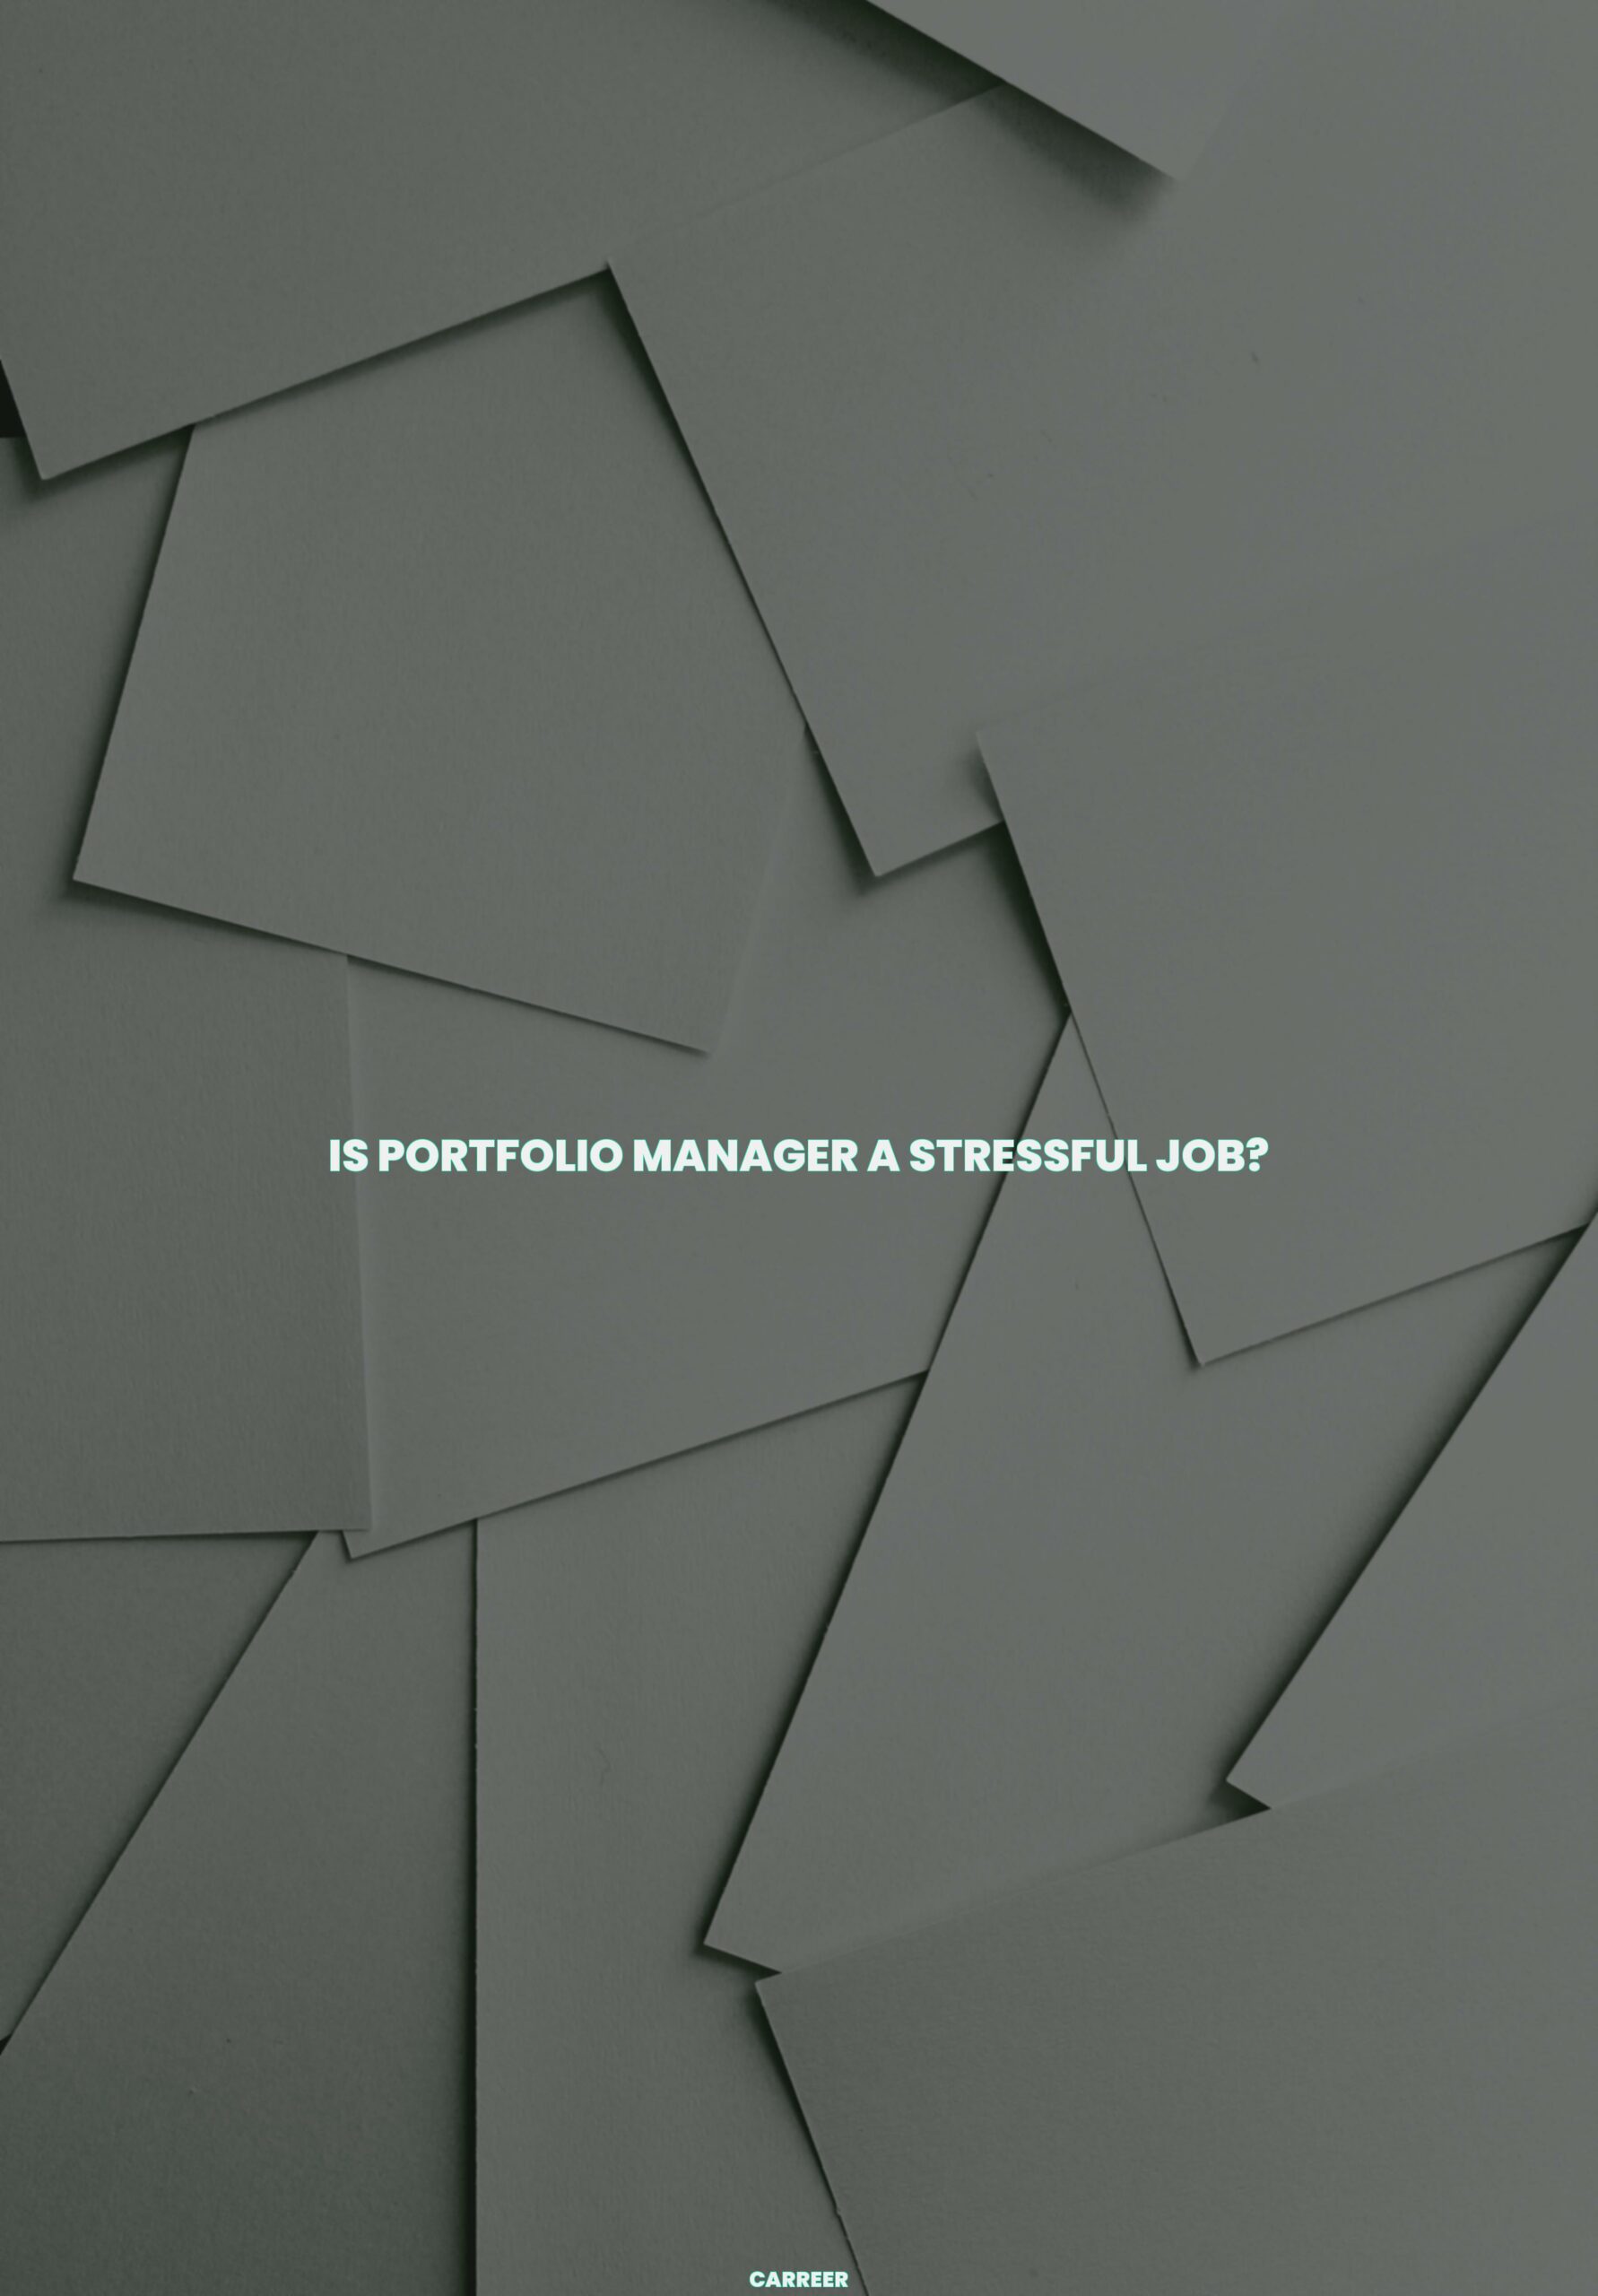 Is portfolio manager a stressful job?